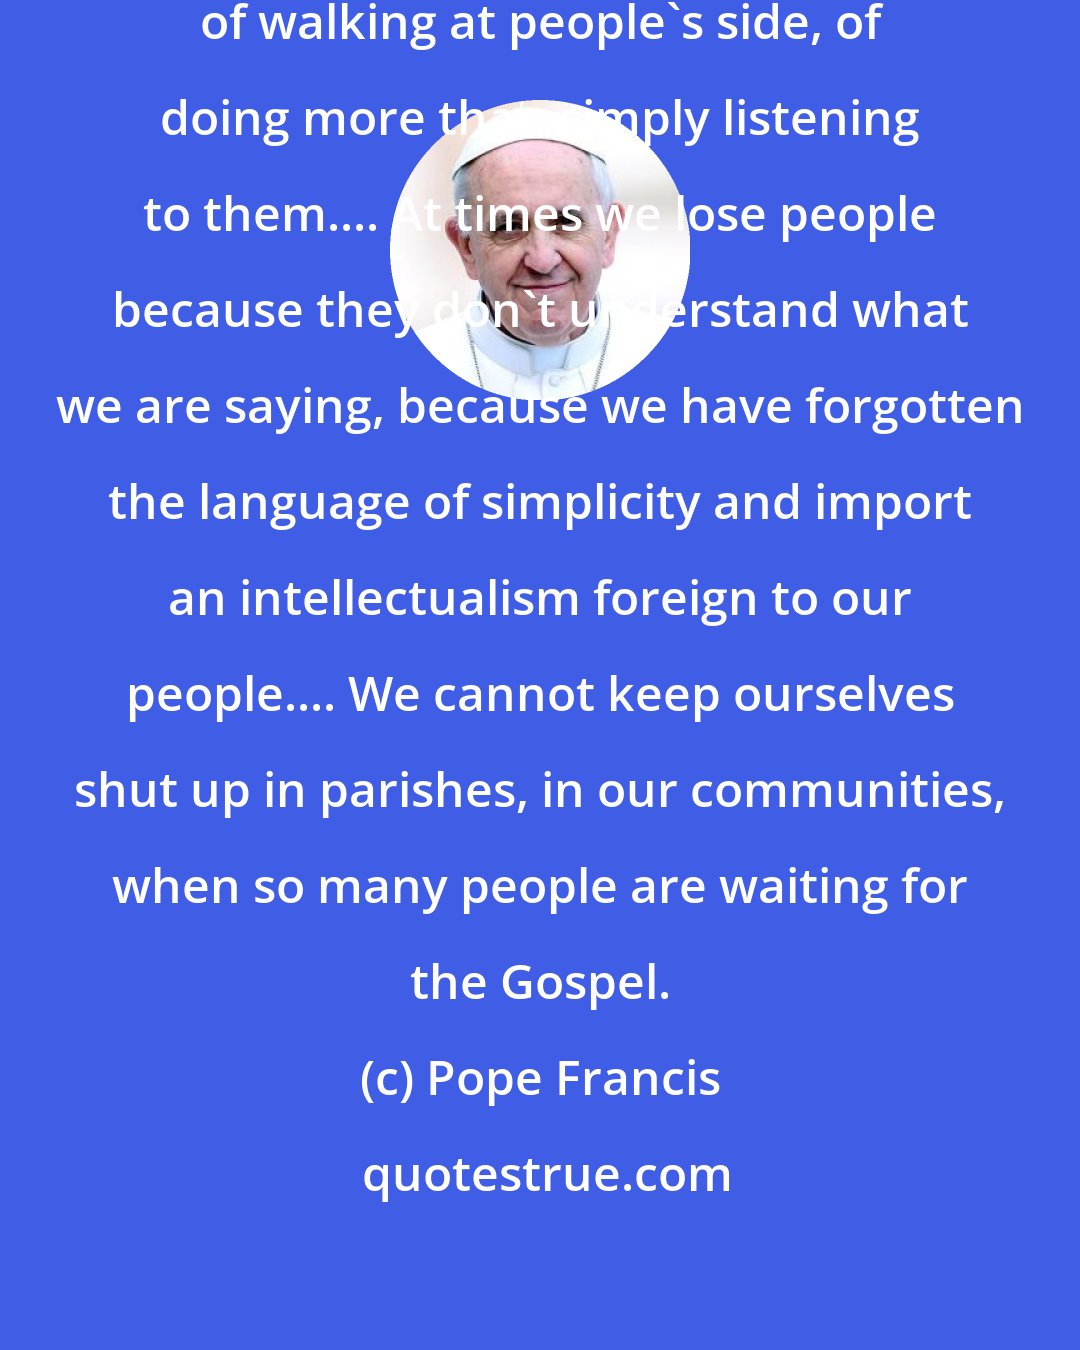 Pope Francis: Today, we need a Church capable of walking at people's side, of doing more than simply listening to them.... At times we lose people because they don't understand what we are saying, because we have forgotten the language of simplicity and import an intellectualism foreign to our people.... We cannot keep ourselves shut up in parishes, in our communities, when so many people are waiting for the Gospel.